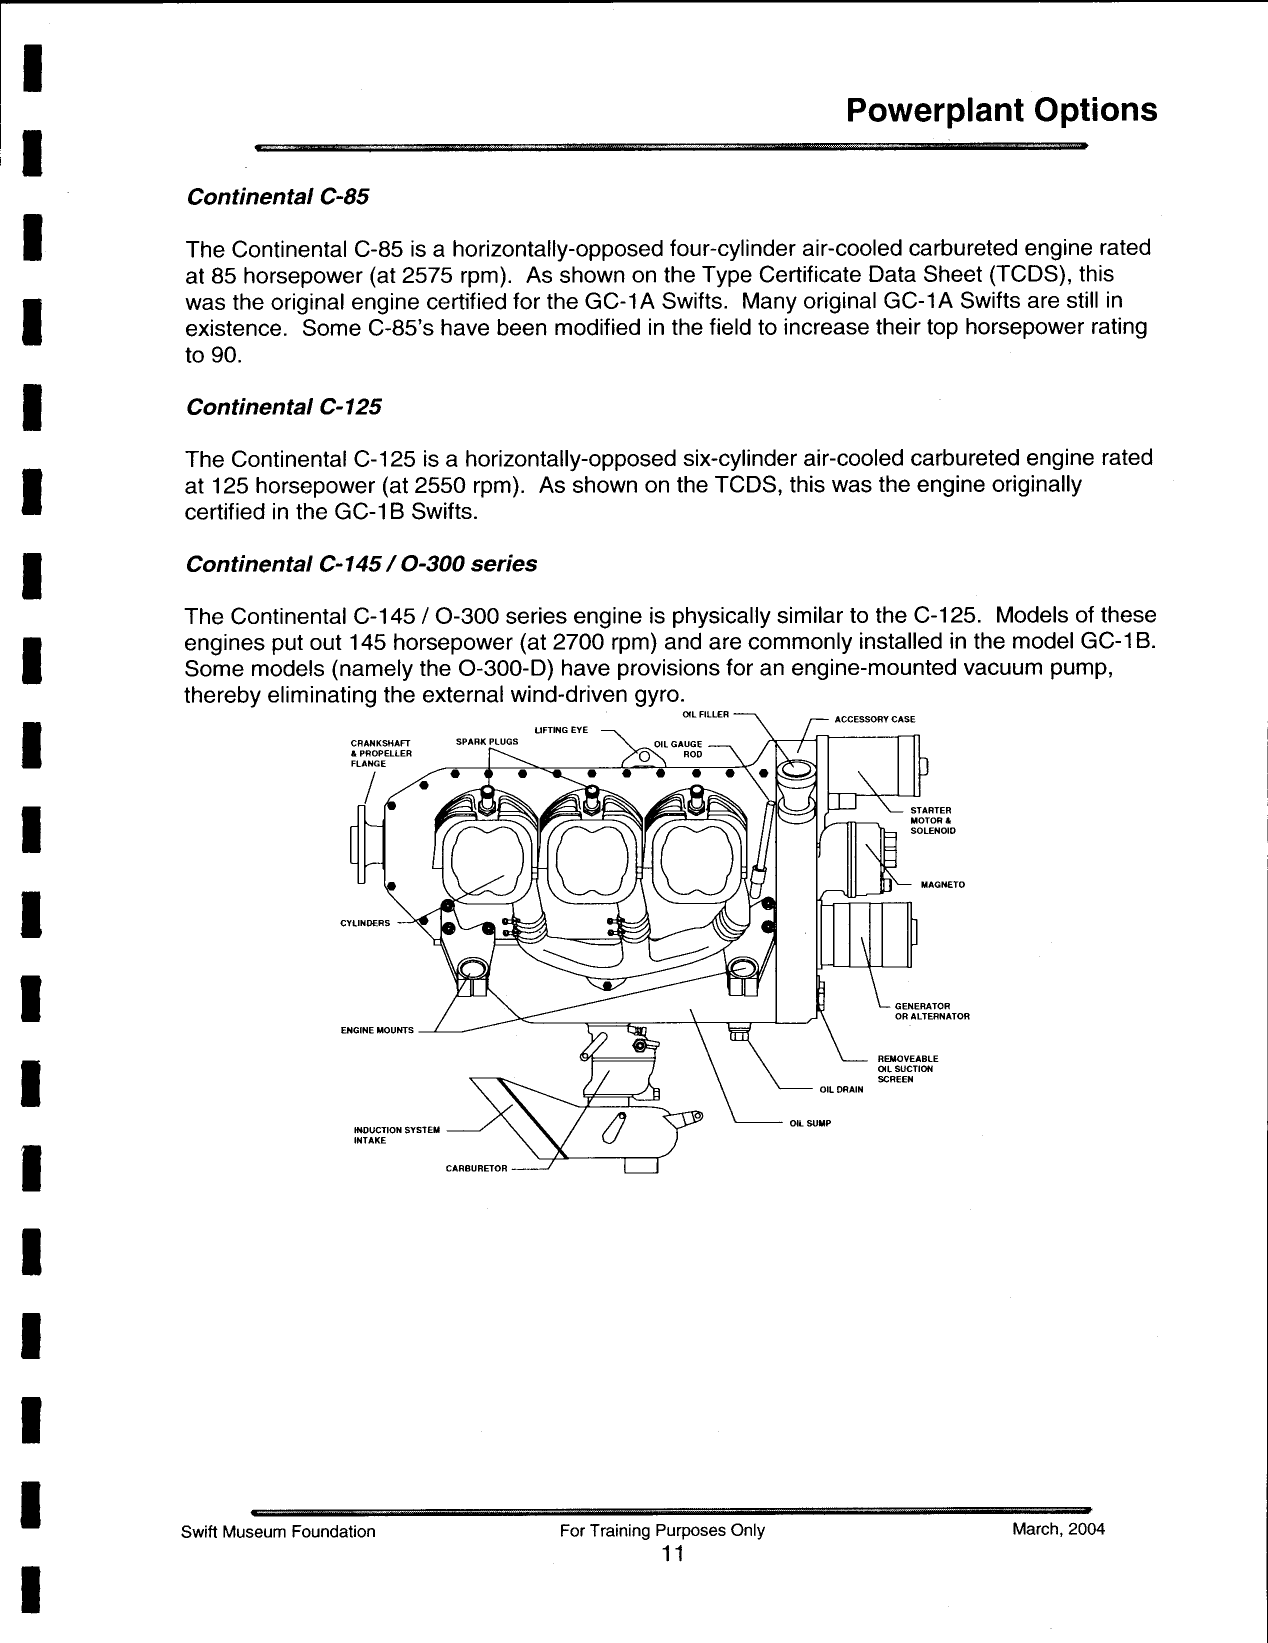 Sample page 15 from AirCorps Library document: Initial / Recurrent Pilot Training Handbook